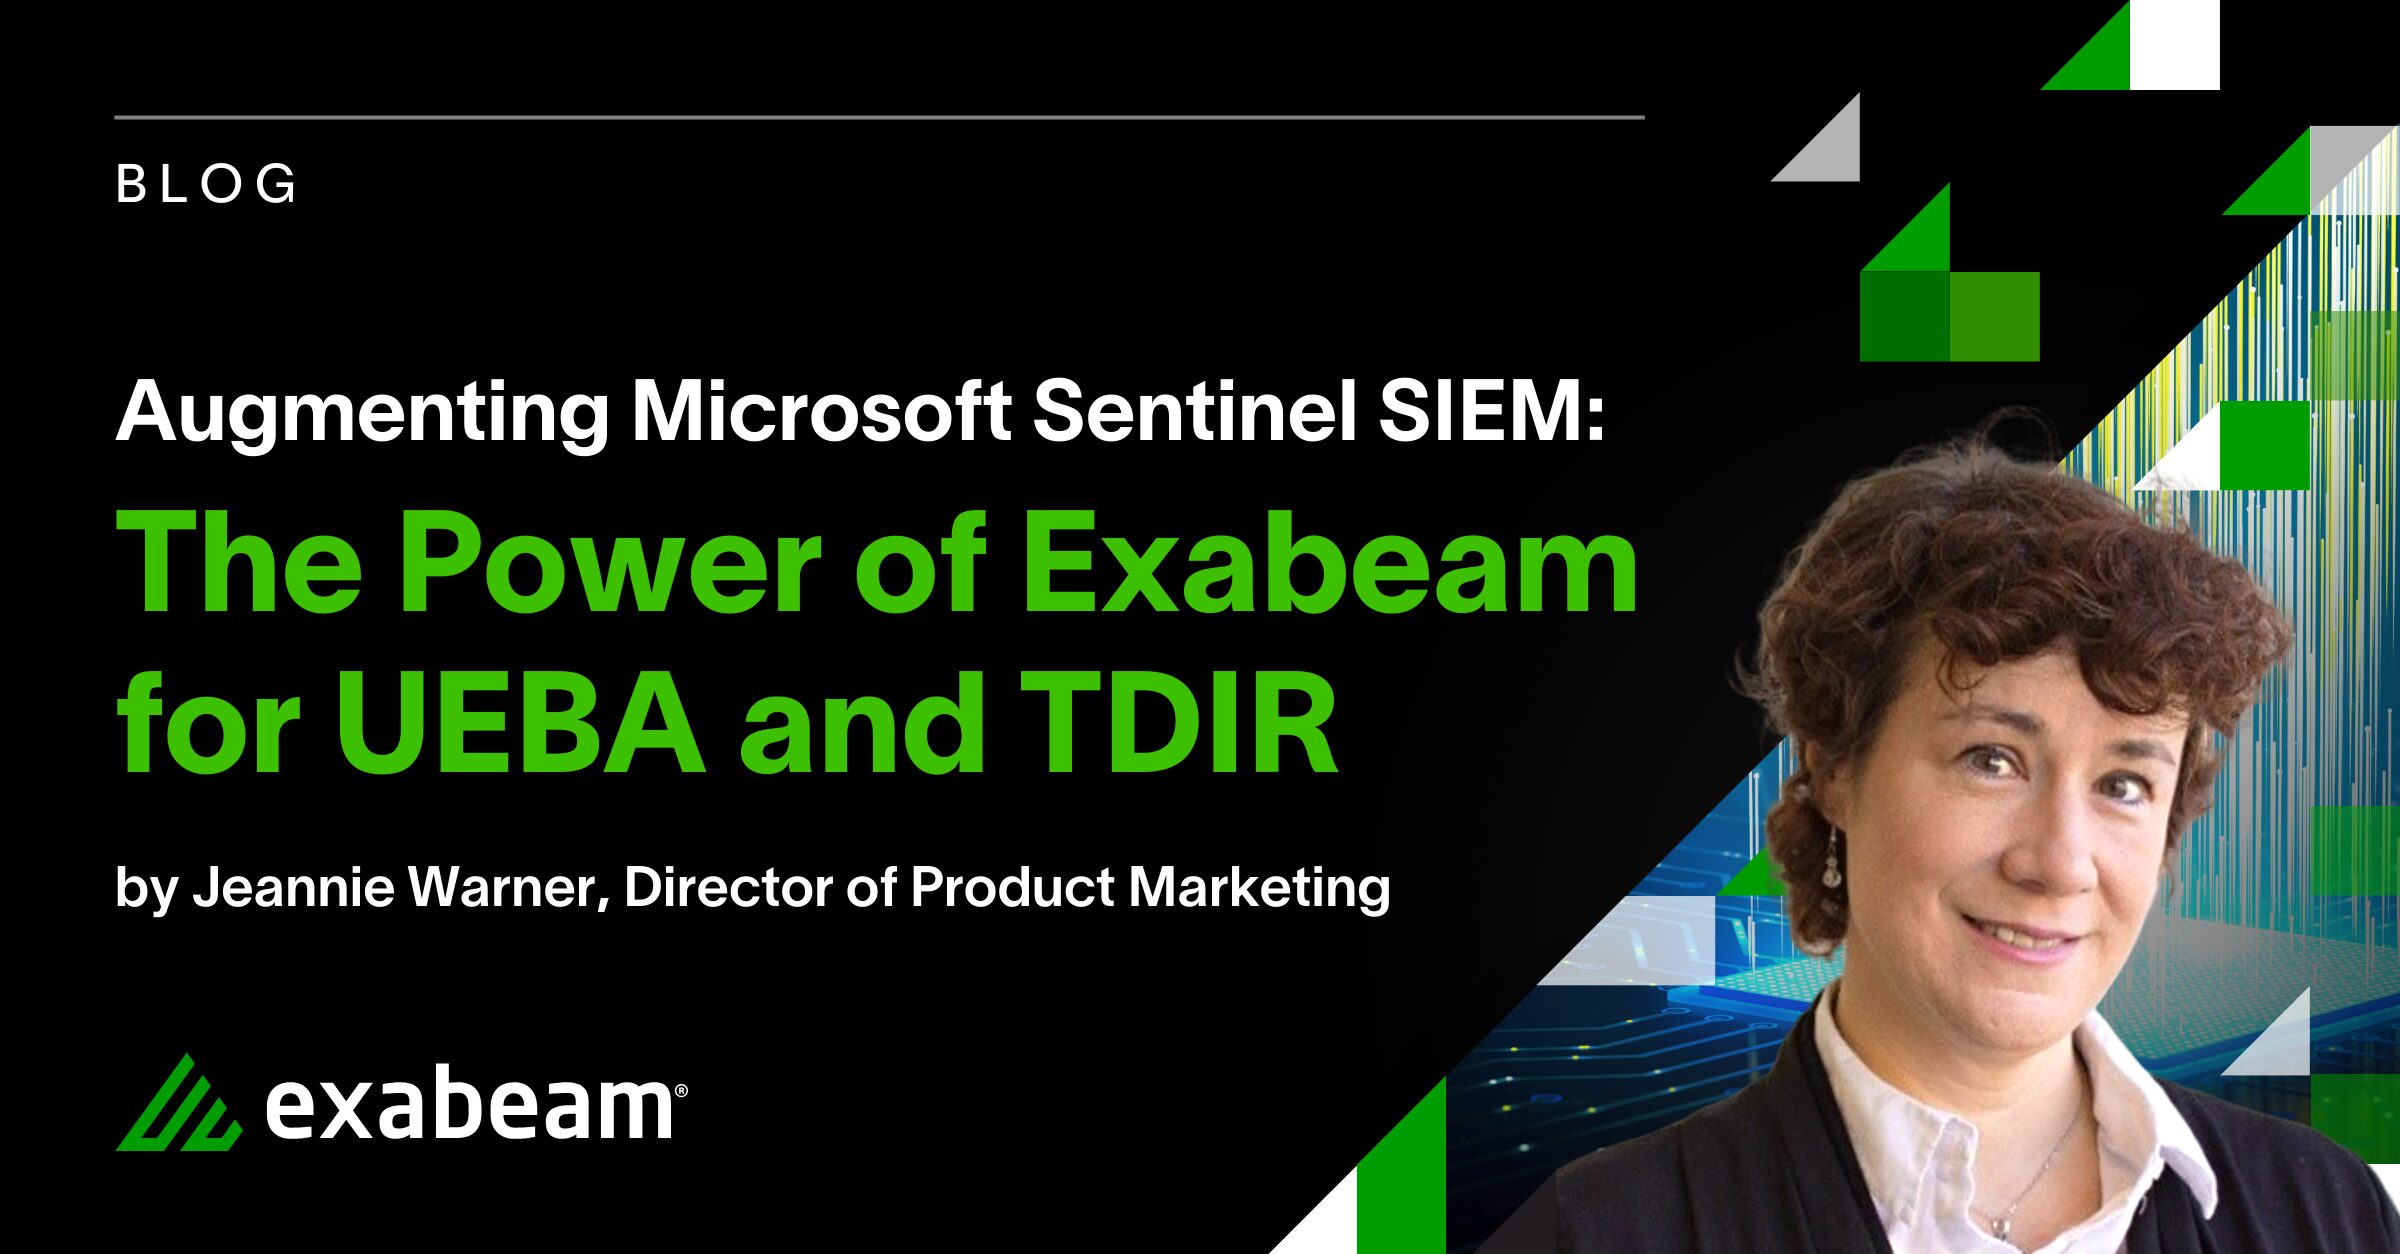 Augmenting Microsoft Sentinel SIEM: The Power of Exabeam for UEBA and TDIR